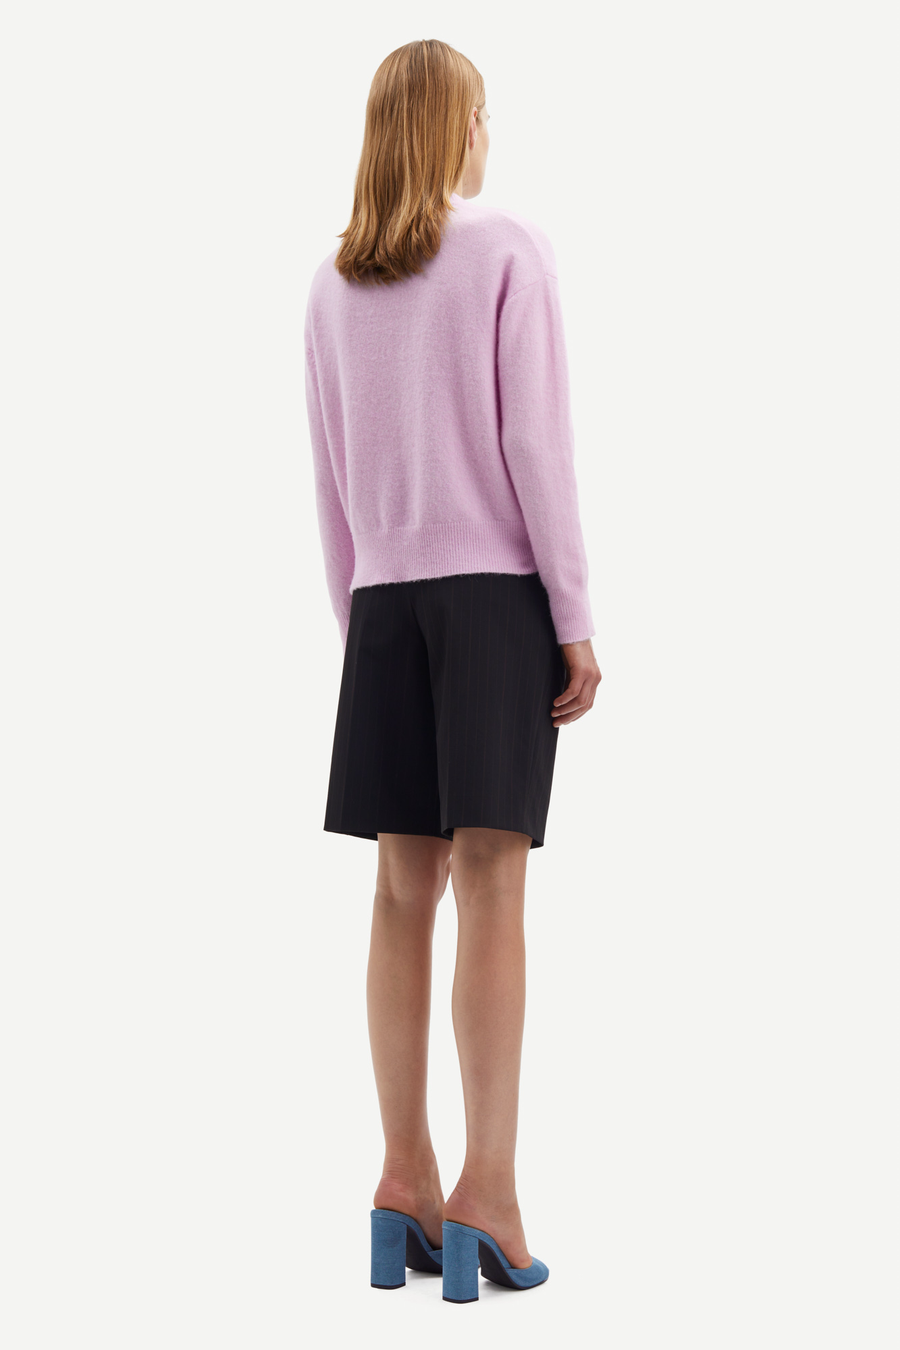 SAMSOE SAMSOE ANOUR IN LILAC SNOW - PULLOVER RUNDHALS PUDER LILA